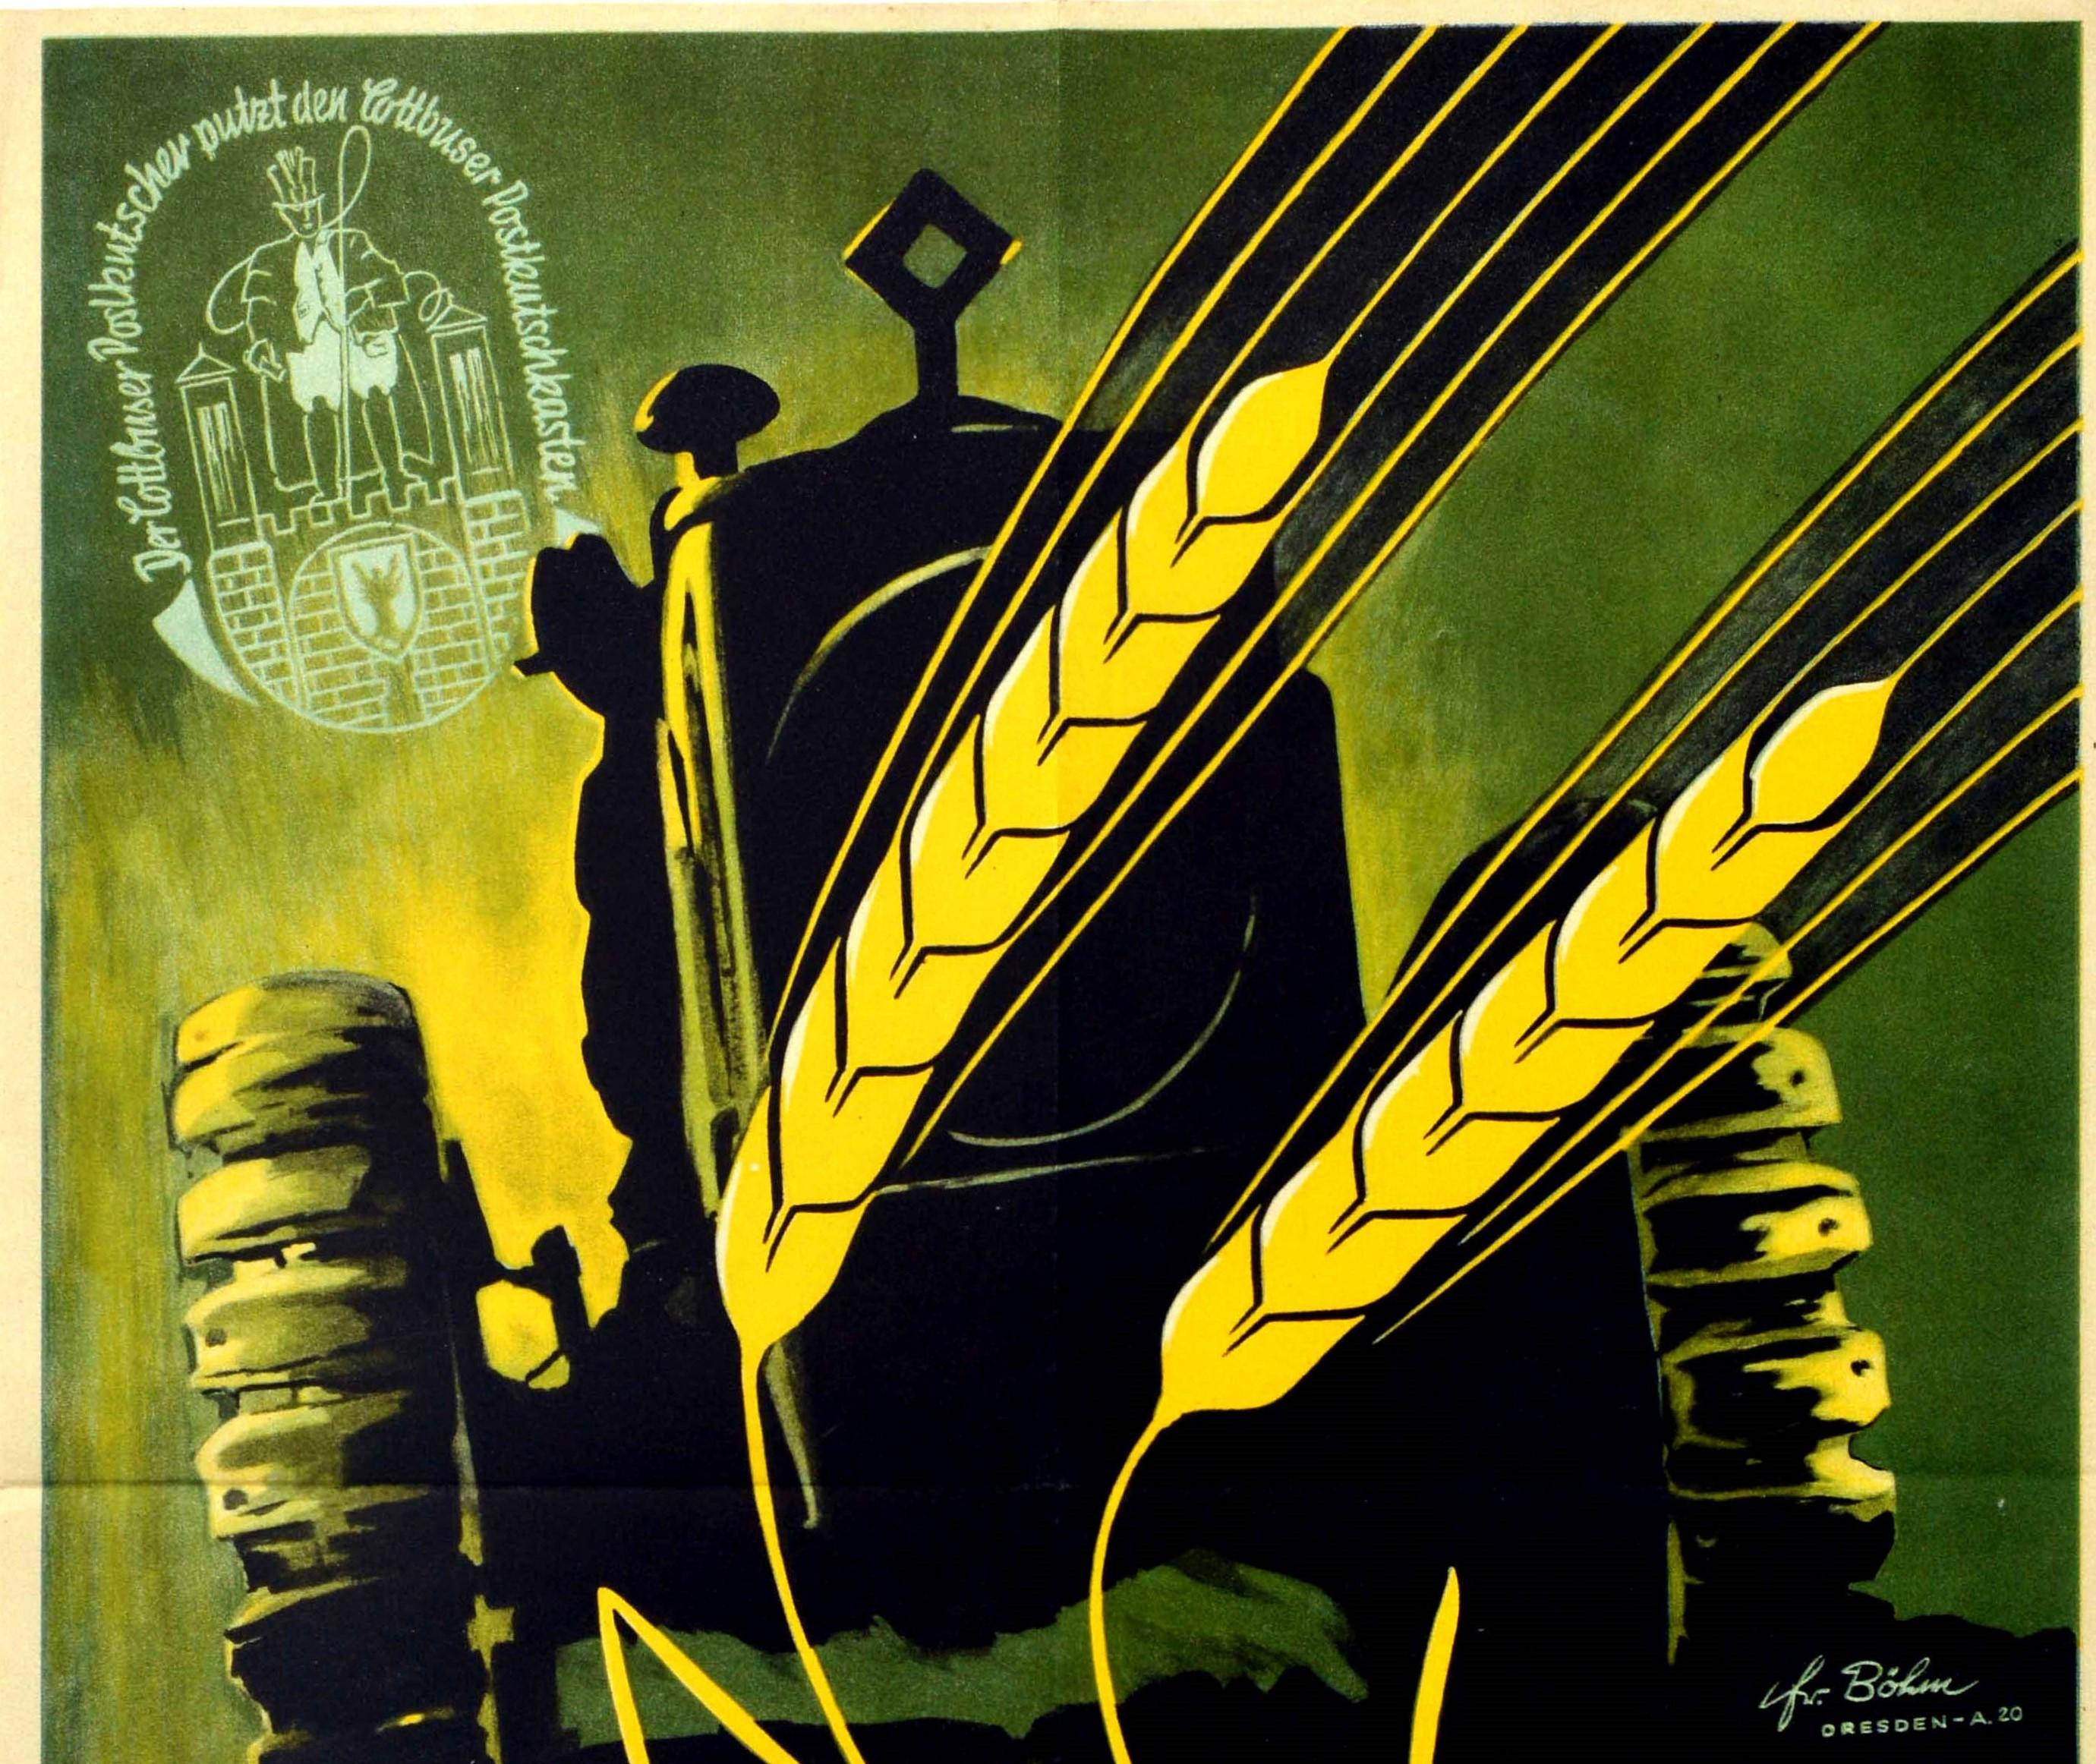 Original vintage advertising poster for the Cottbuser Landwirtschafts Woche 1949 vom 4-11 September / Cottbus Agriculture Week featuring a great illustration of a yellow ear of wheat in the front of a dark green and black farm tractor lit up by